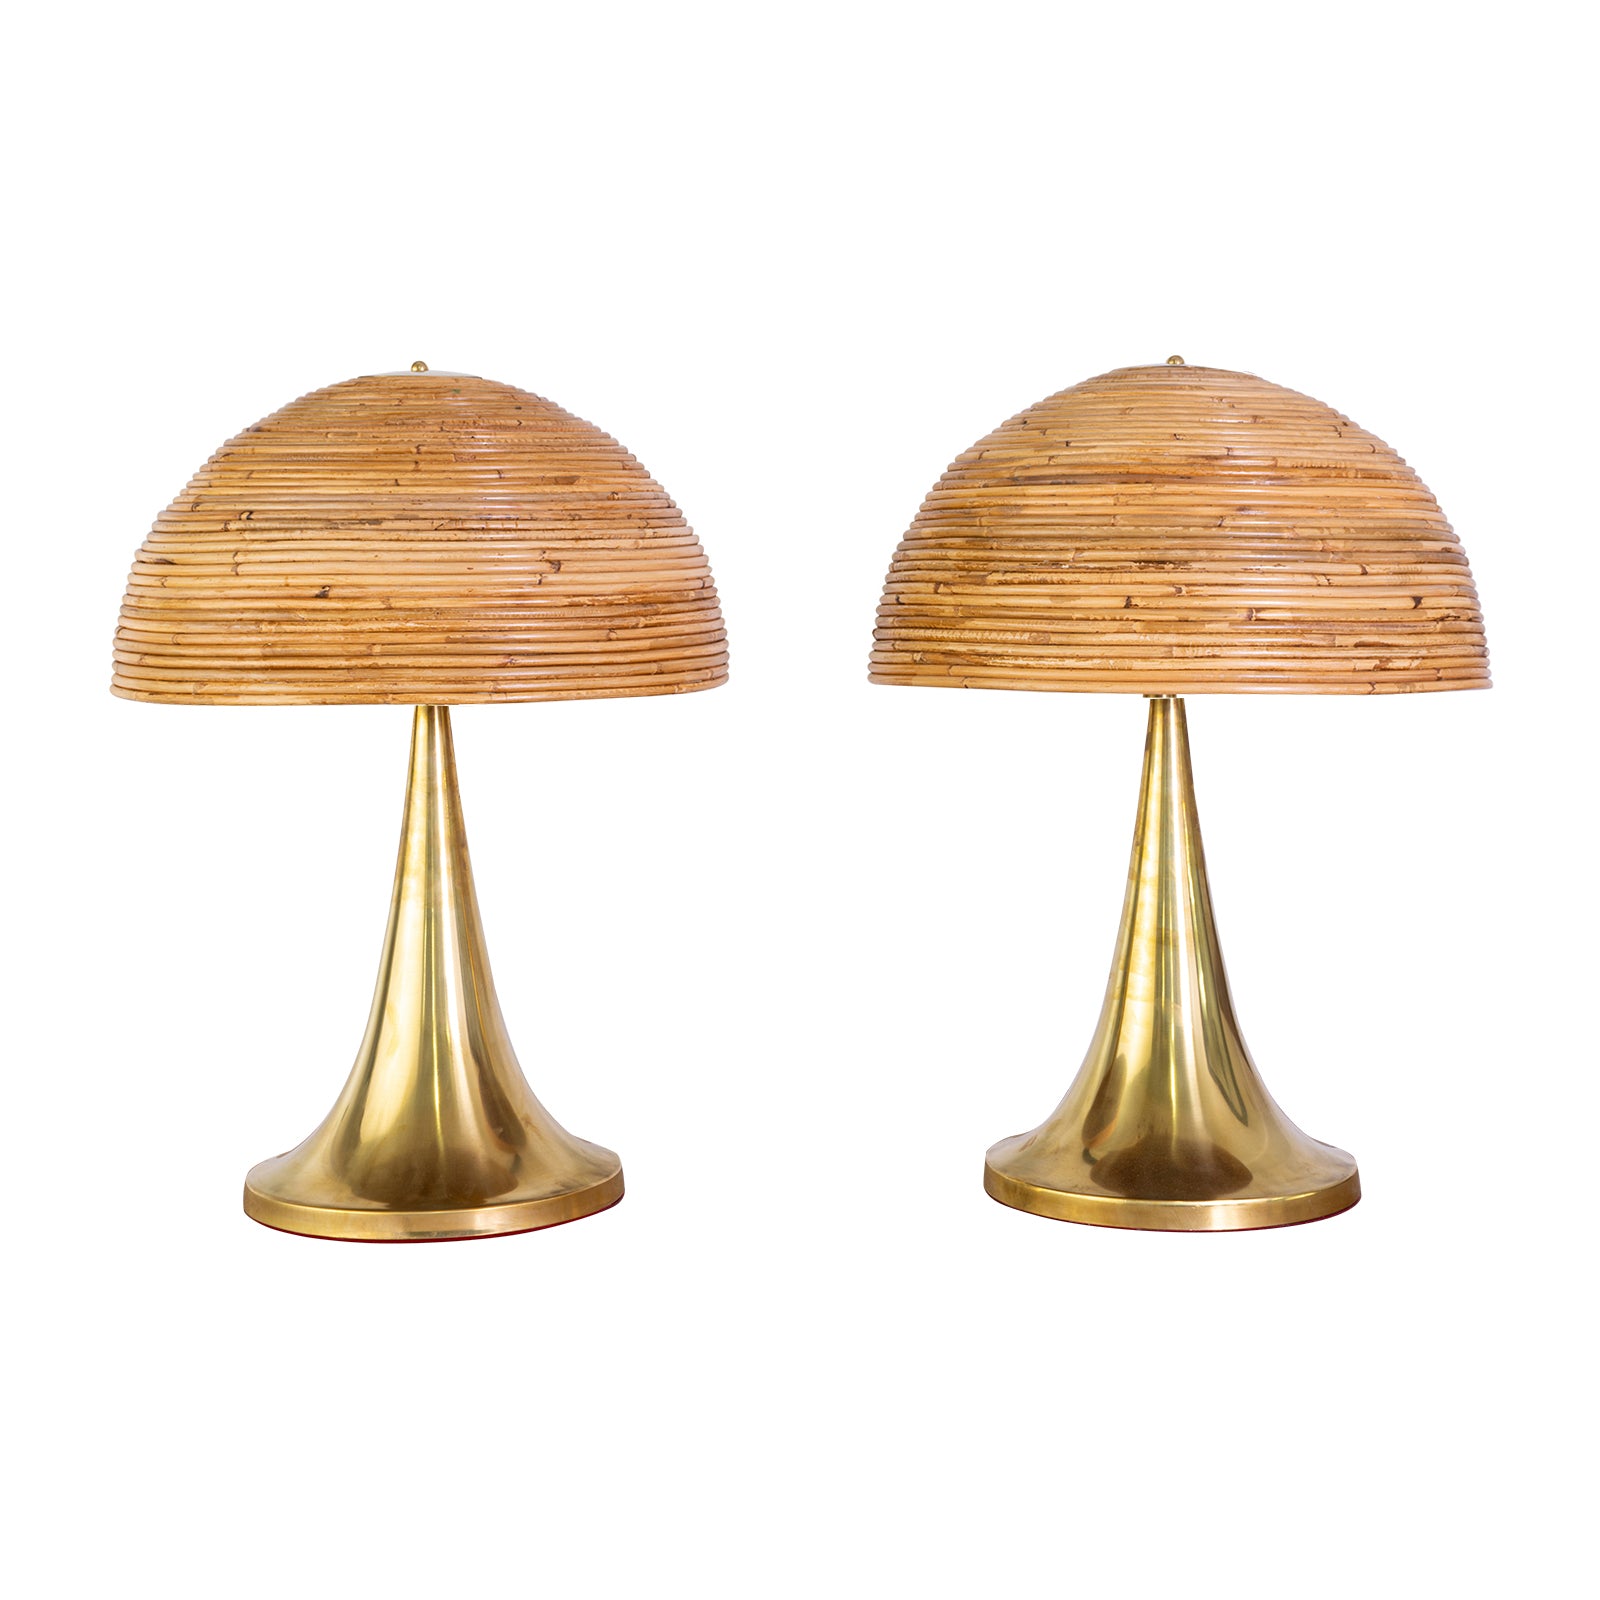 Pair Brass Lamps in the manner of Gabrielle Crispi with Coiled Rattan Shade